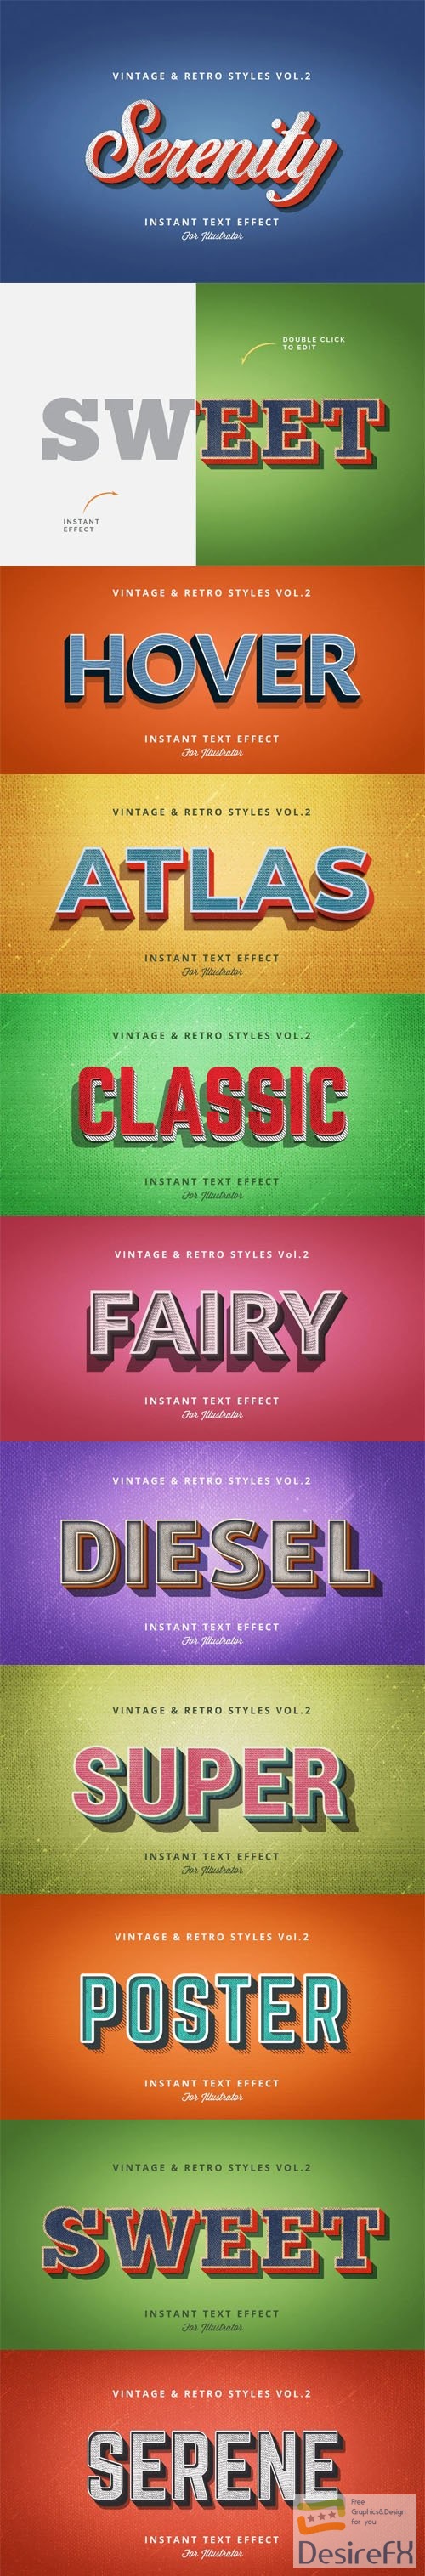 Vintage and Retro Graphic Styles Vol.2 for Adobe Illustrator